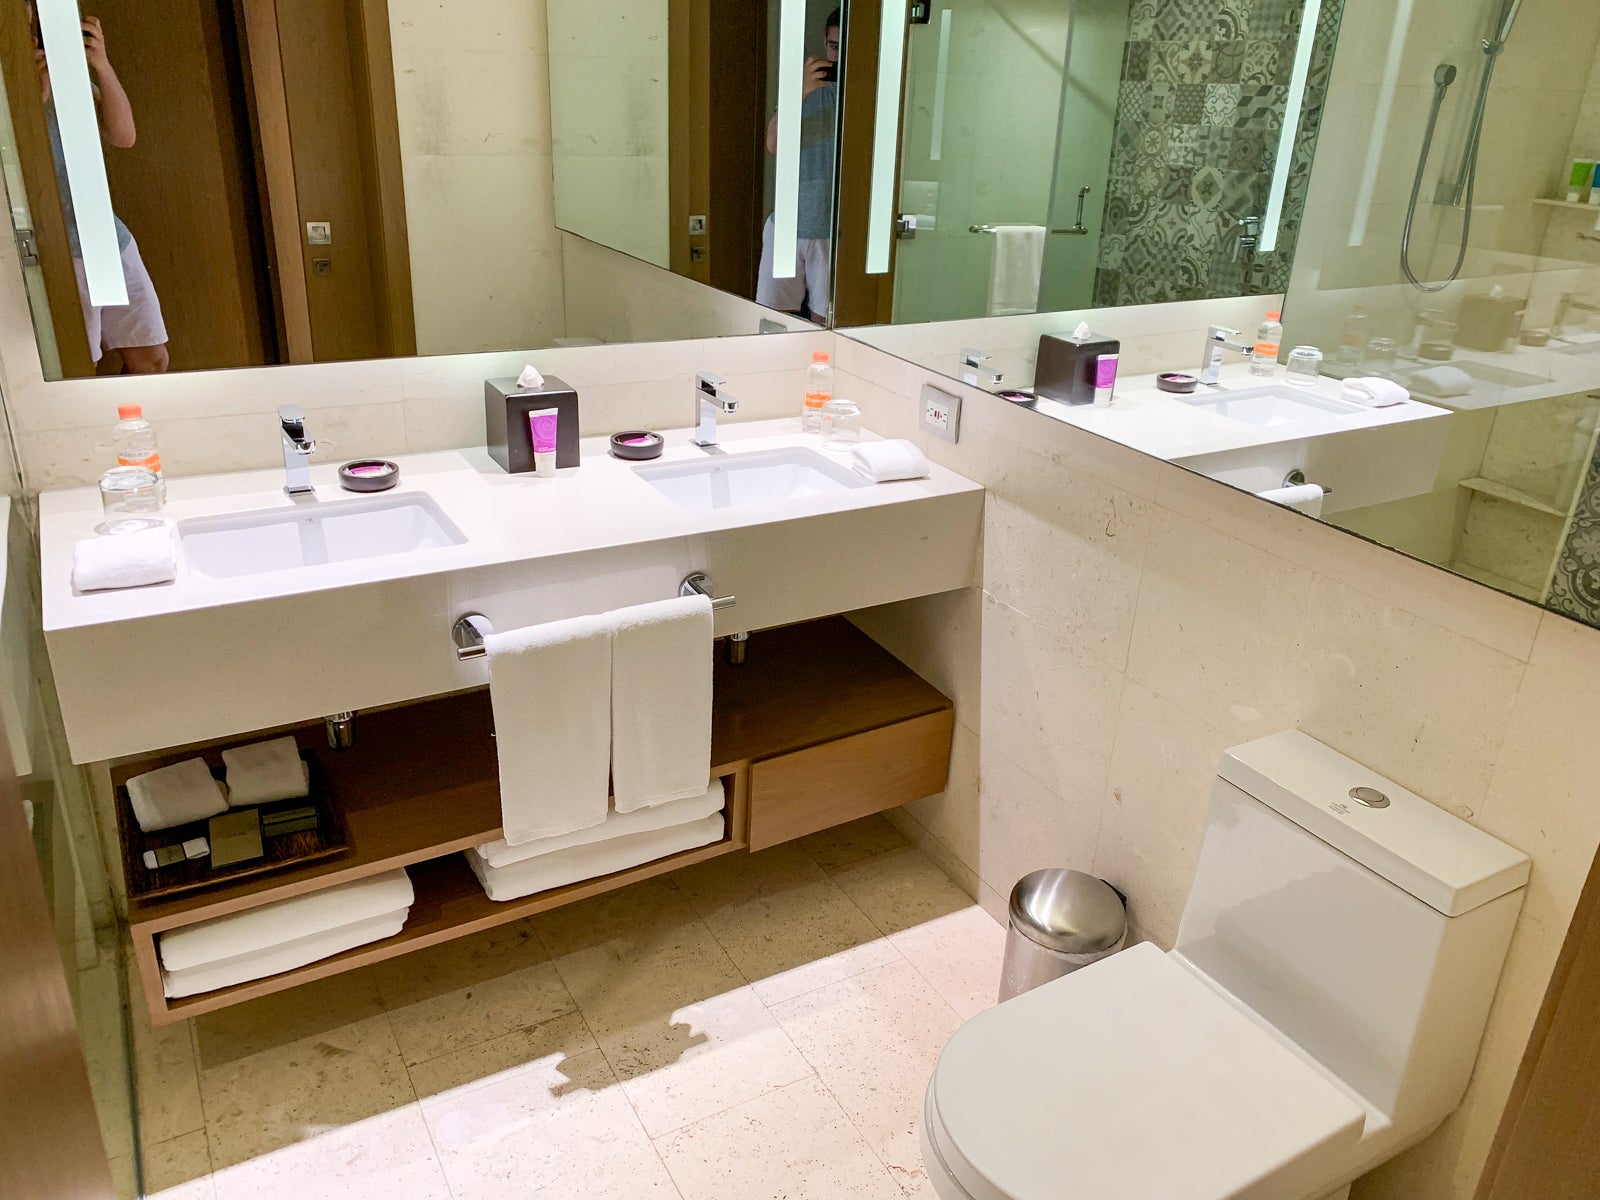 Review: All-Inclusive Hyatt Ziva Cancun - The Points Guy